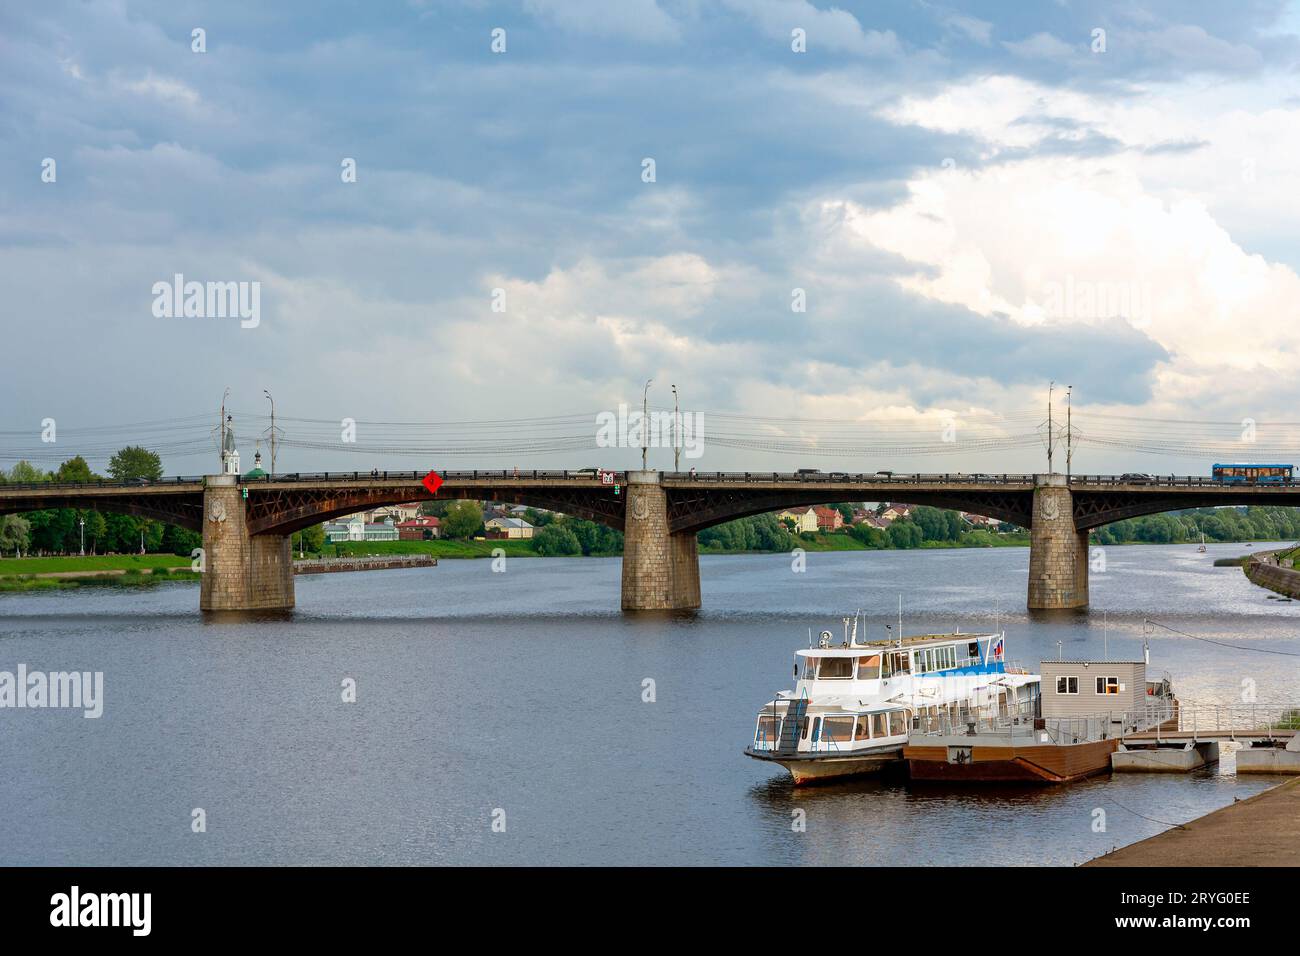 Tver, view from the Mikhail Yaroslavich embankment to the New Volga Bridge, picturesque landscape Stock Photo